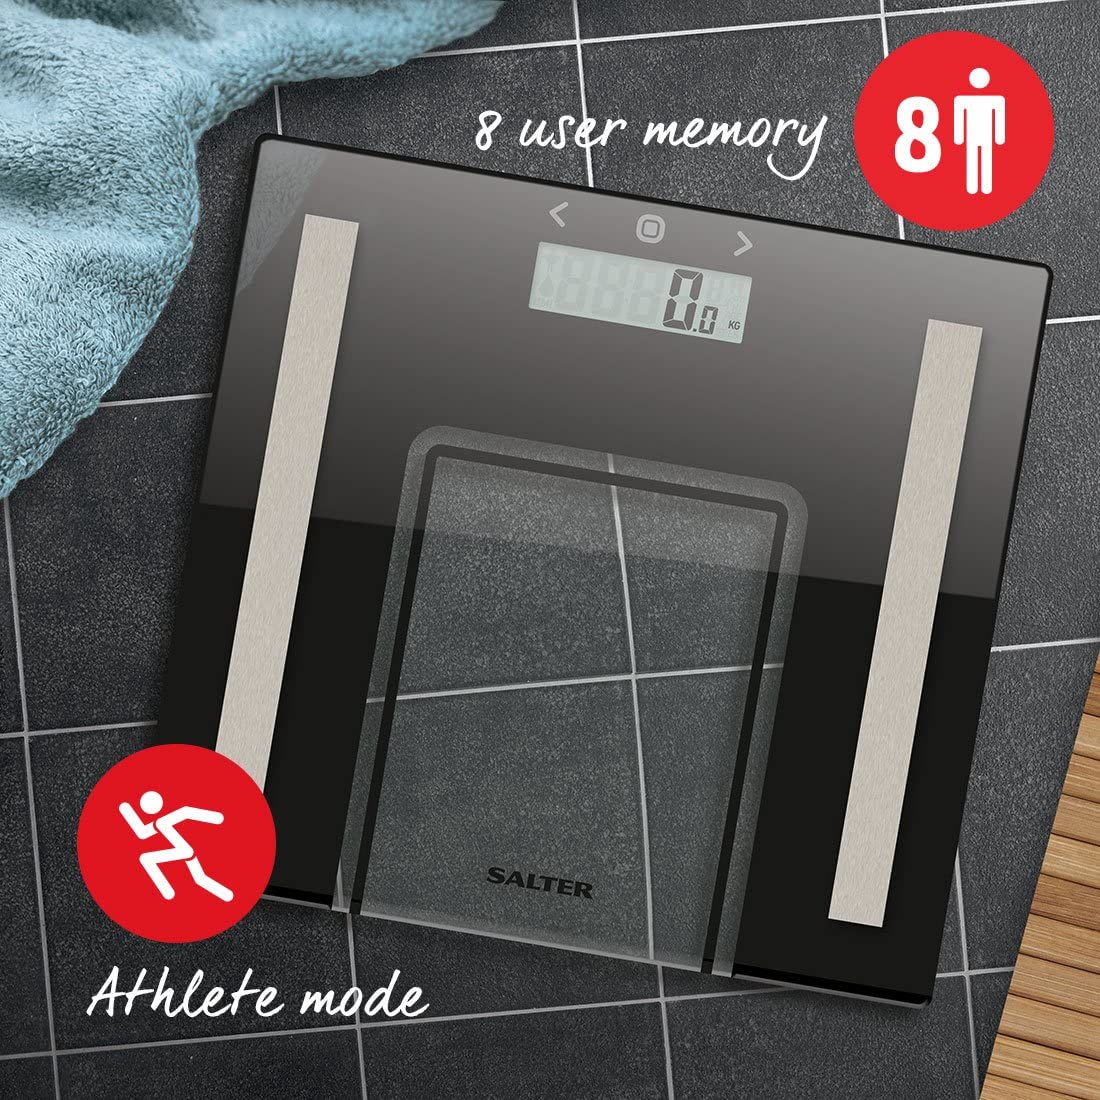 SALTER glass analytical scale, Weigh weight, body fat, body water percentage, BMI, Person memory for up to 8 people, Athlete mode, Slim design, Easy to read display.